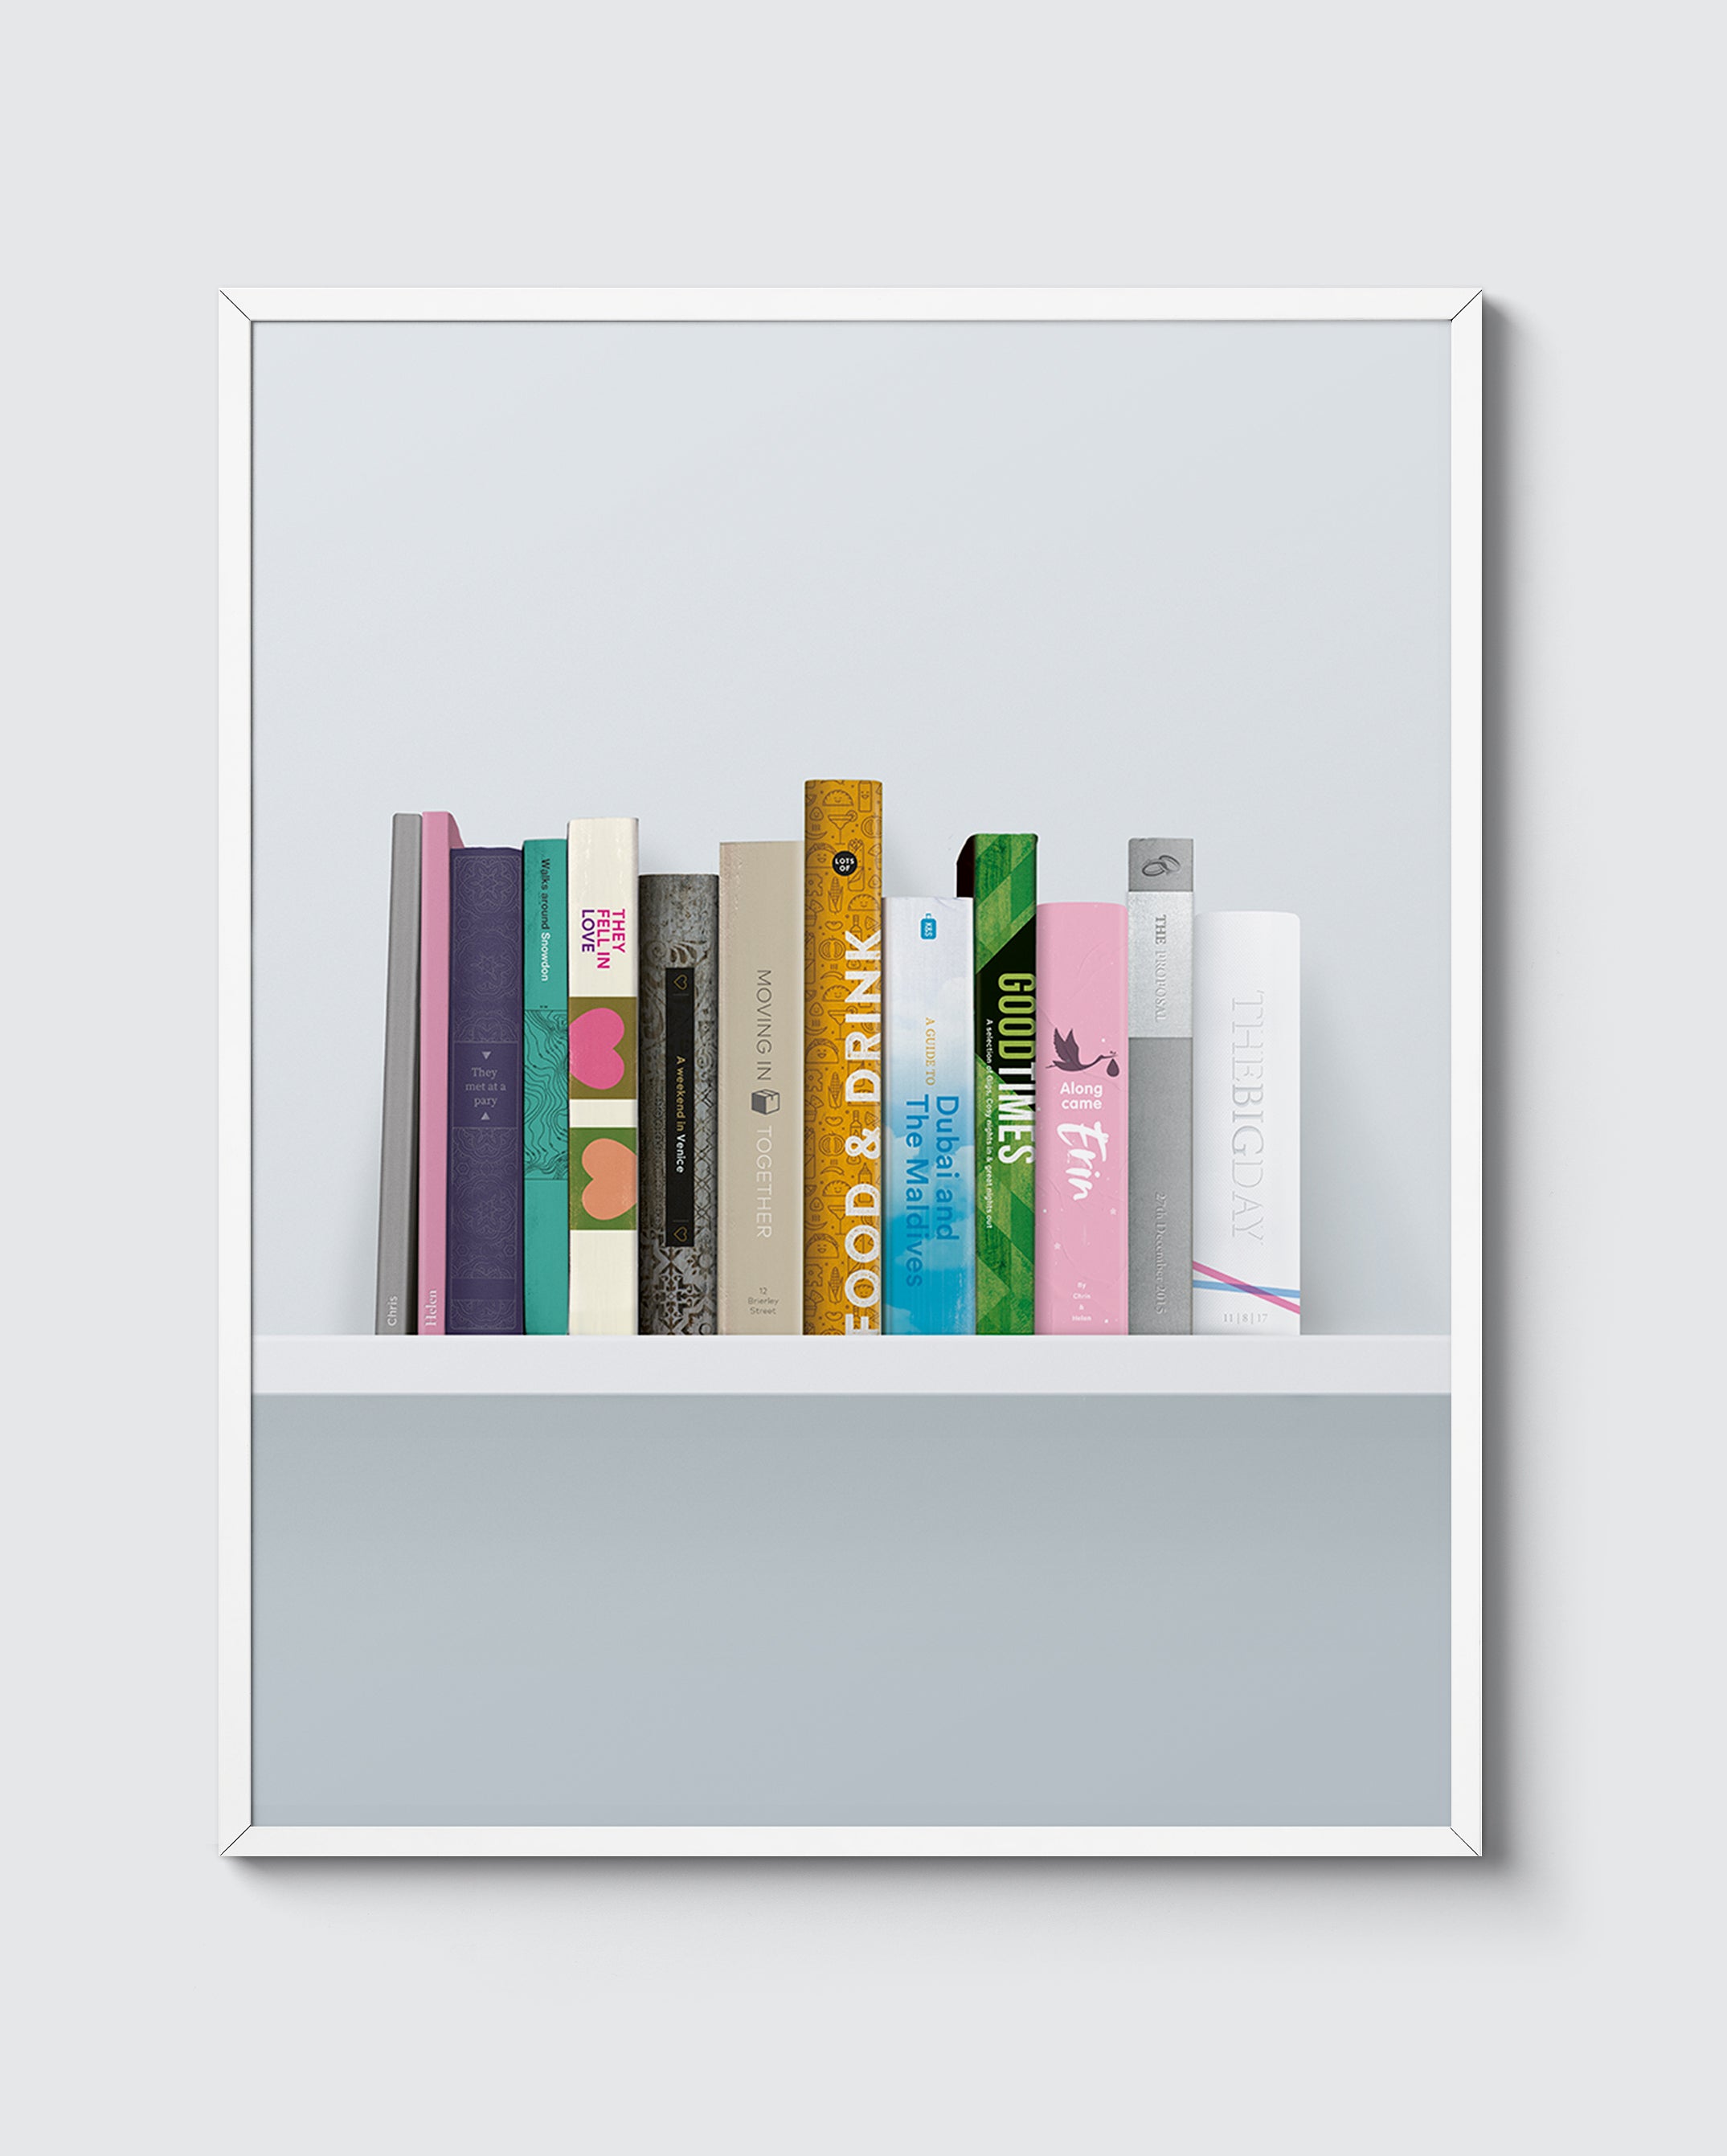 Personalised Love Story Print. Features a graphic bookshelf, where each book represents a different stage of your relationship – from first dates to Children and more...